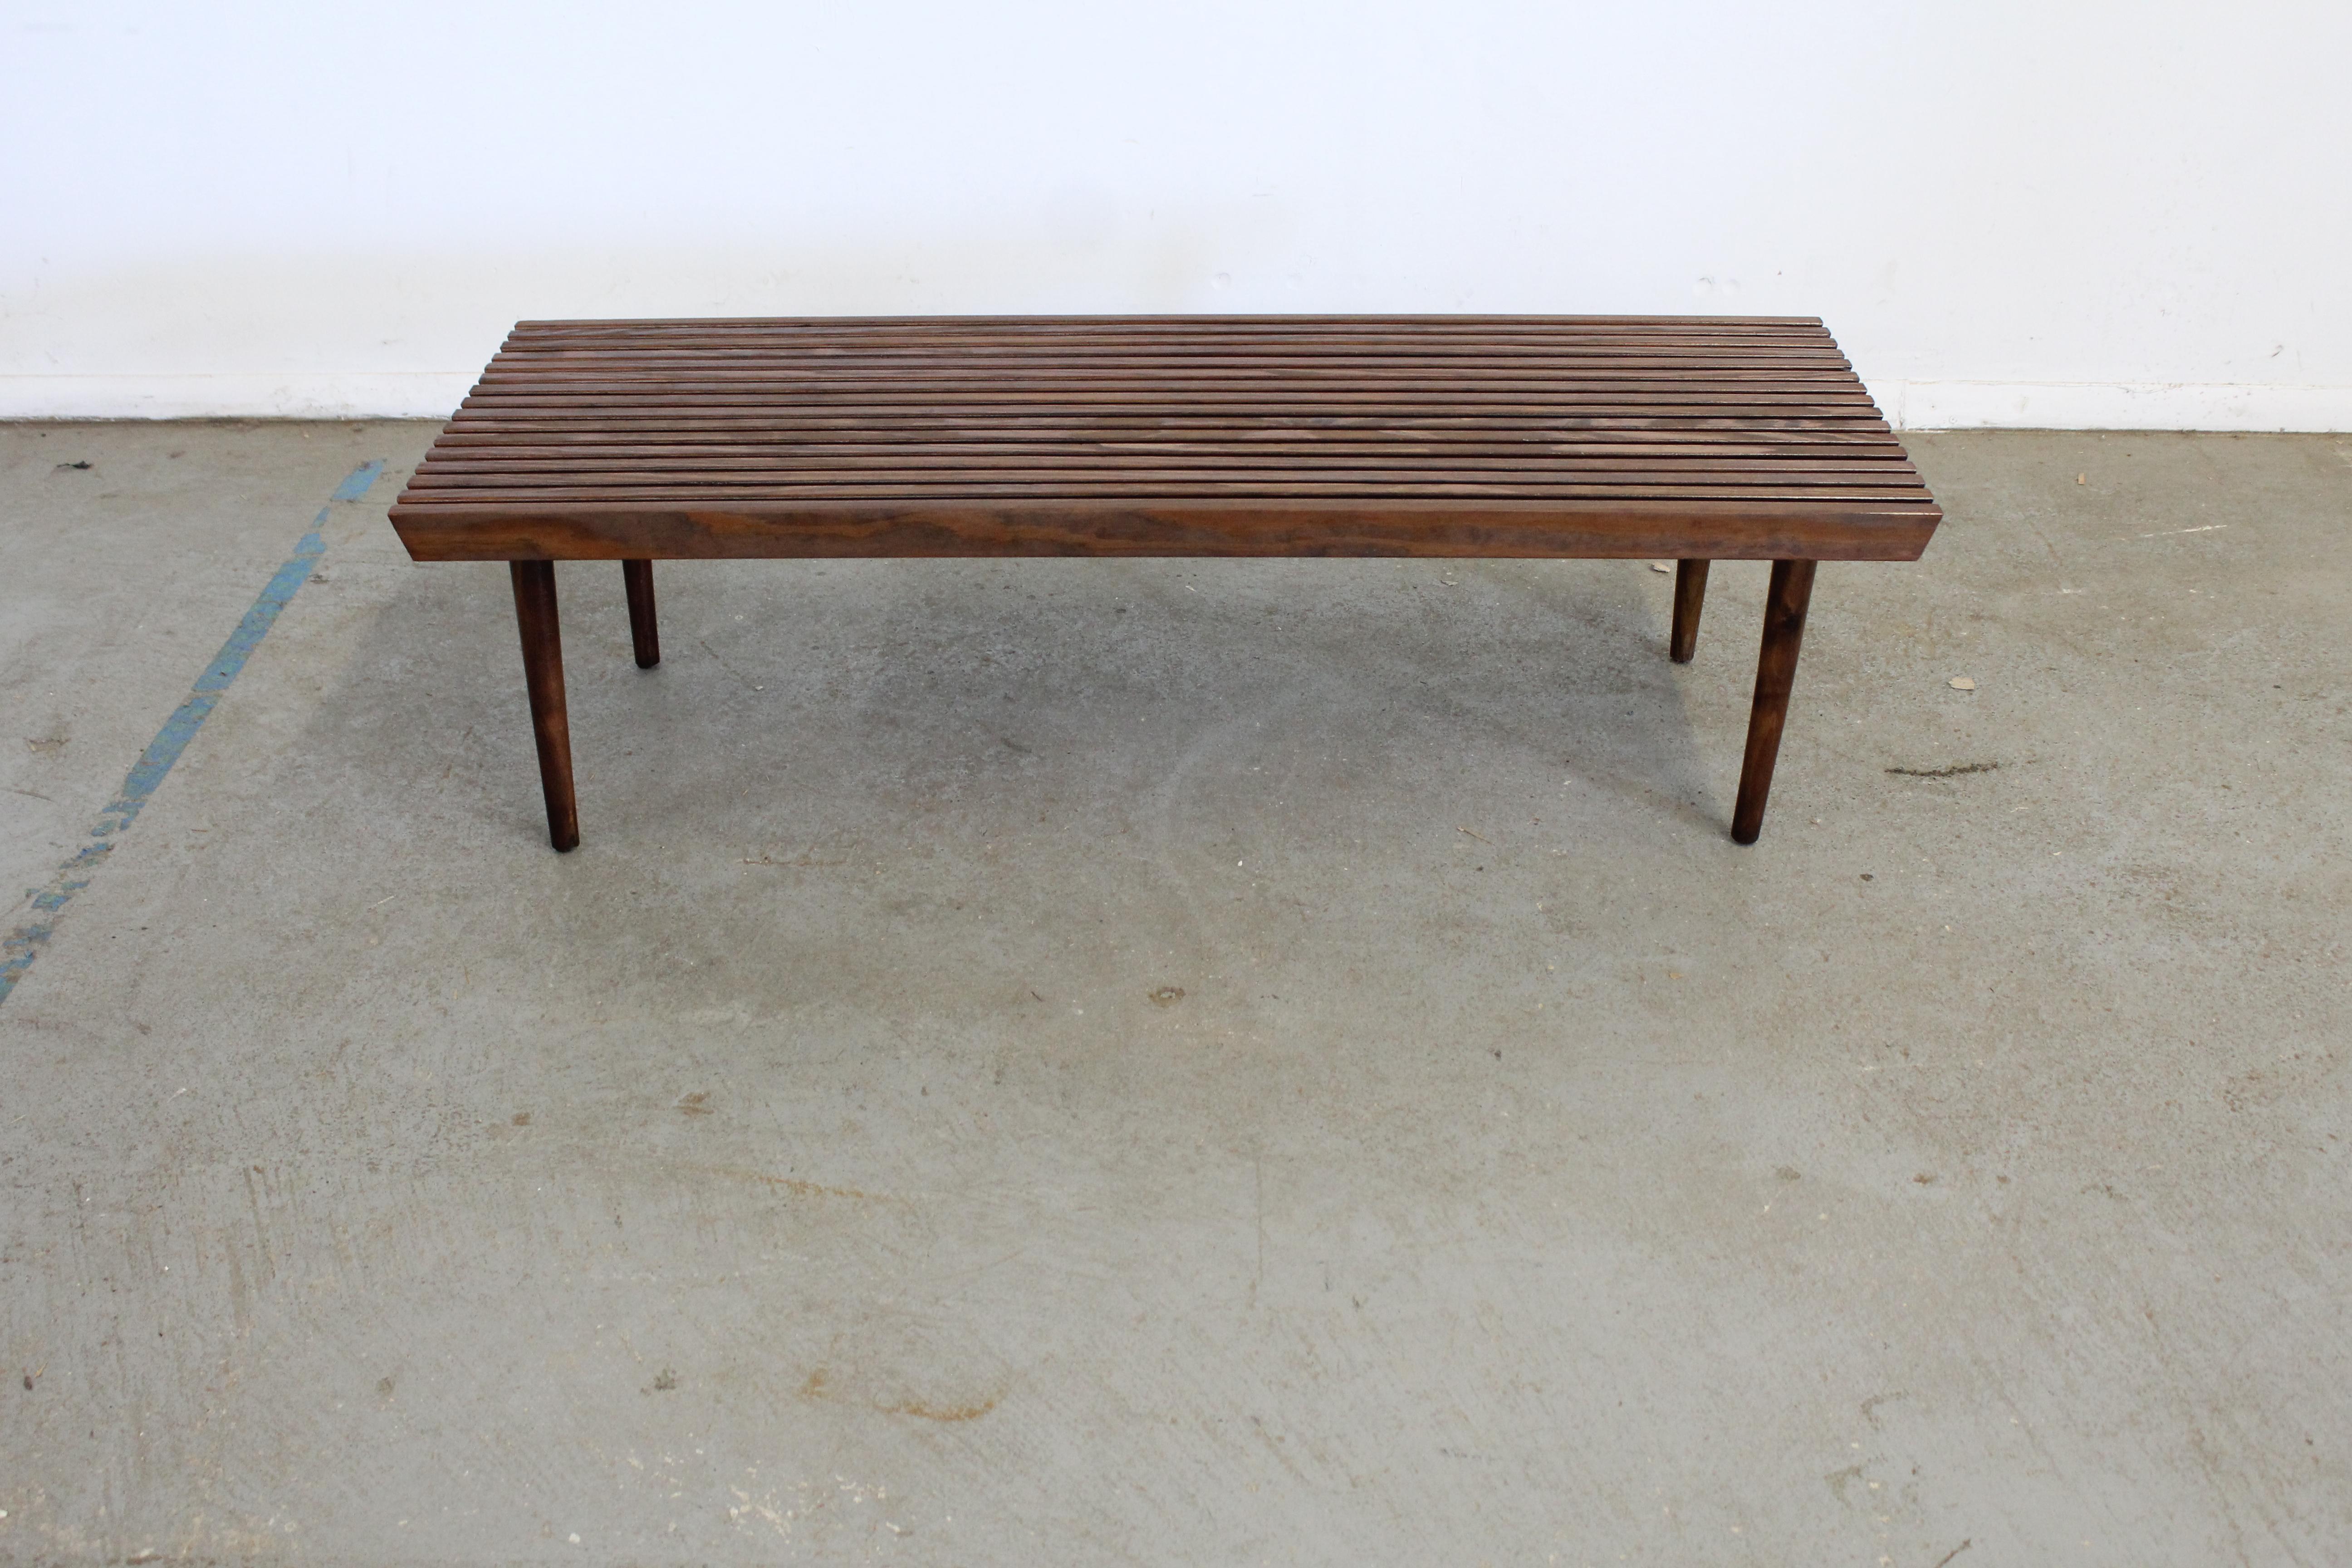 Mid-Century Modern walnut slat bench end/coffee table

Offered is a vintage Mid-Century Modern walnut side table. Has been refinished and is in good condition with minor surface wear/chips. It is structurally sound and stable. It is not signed.